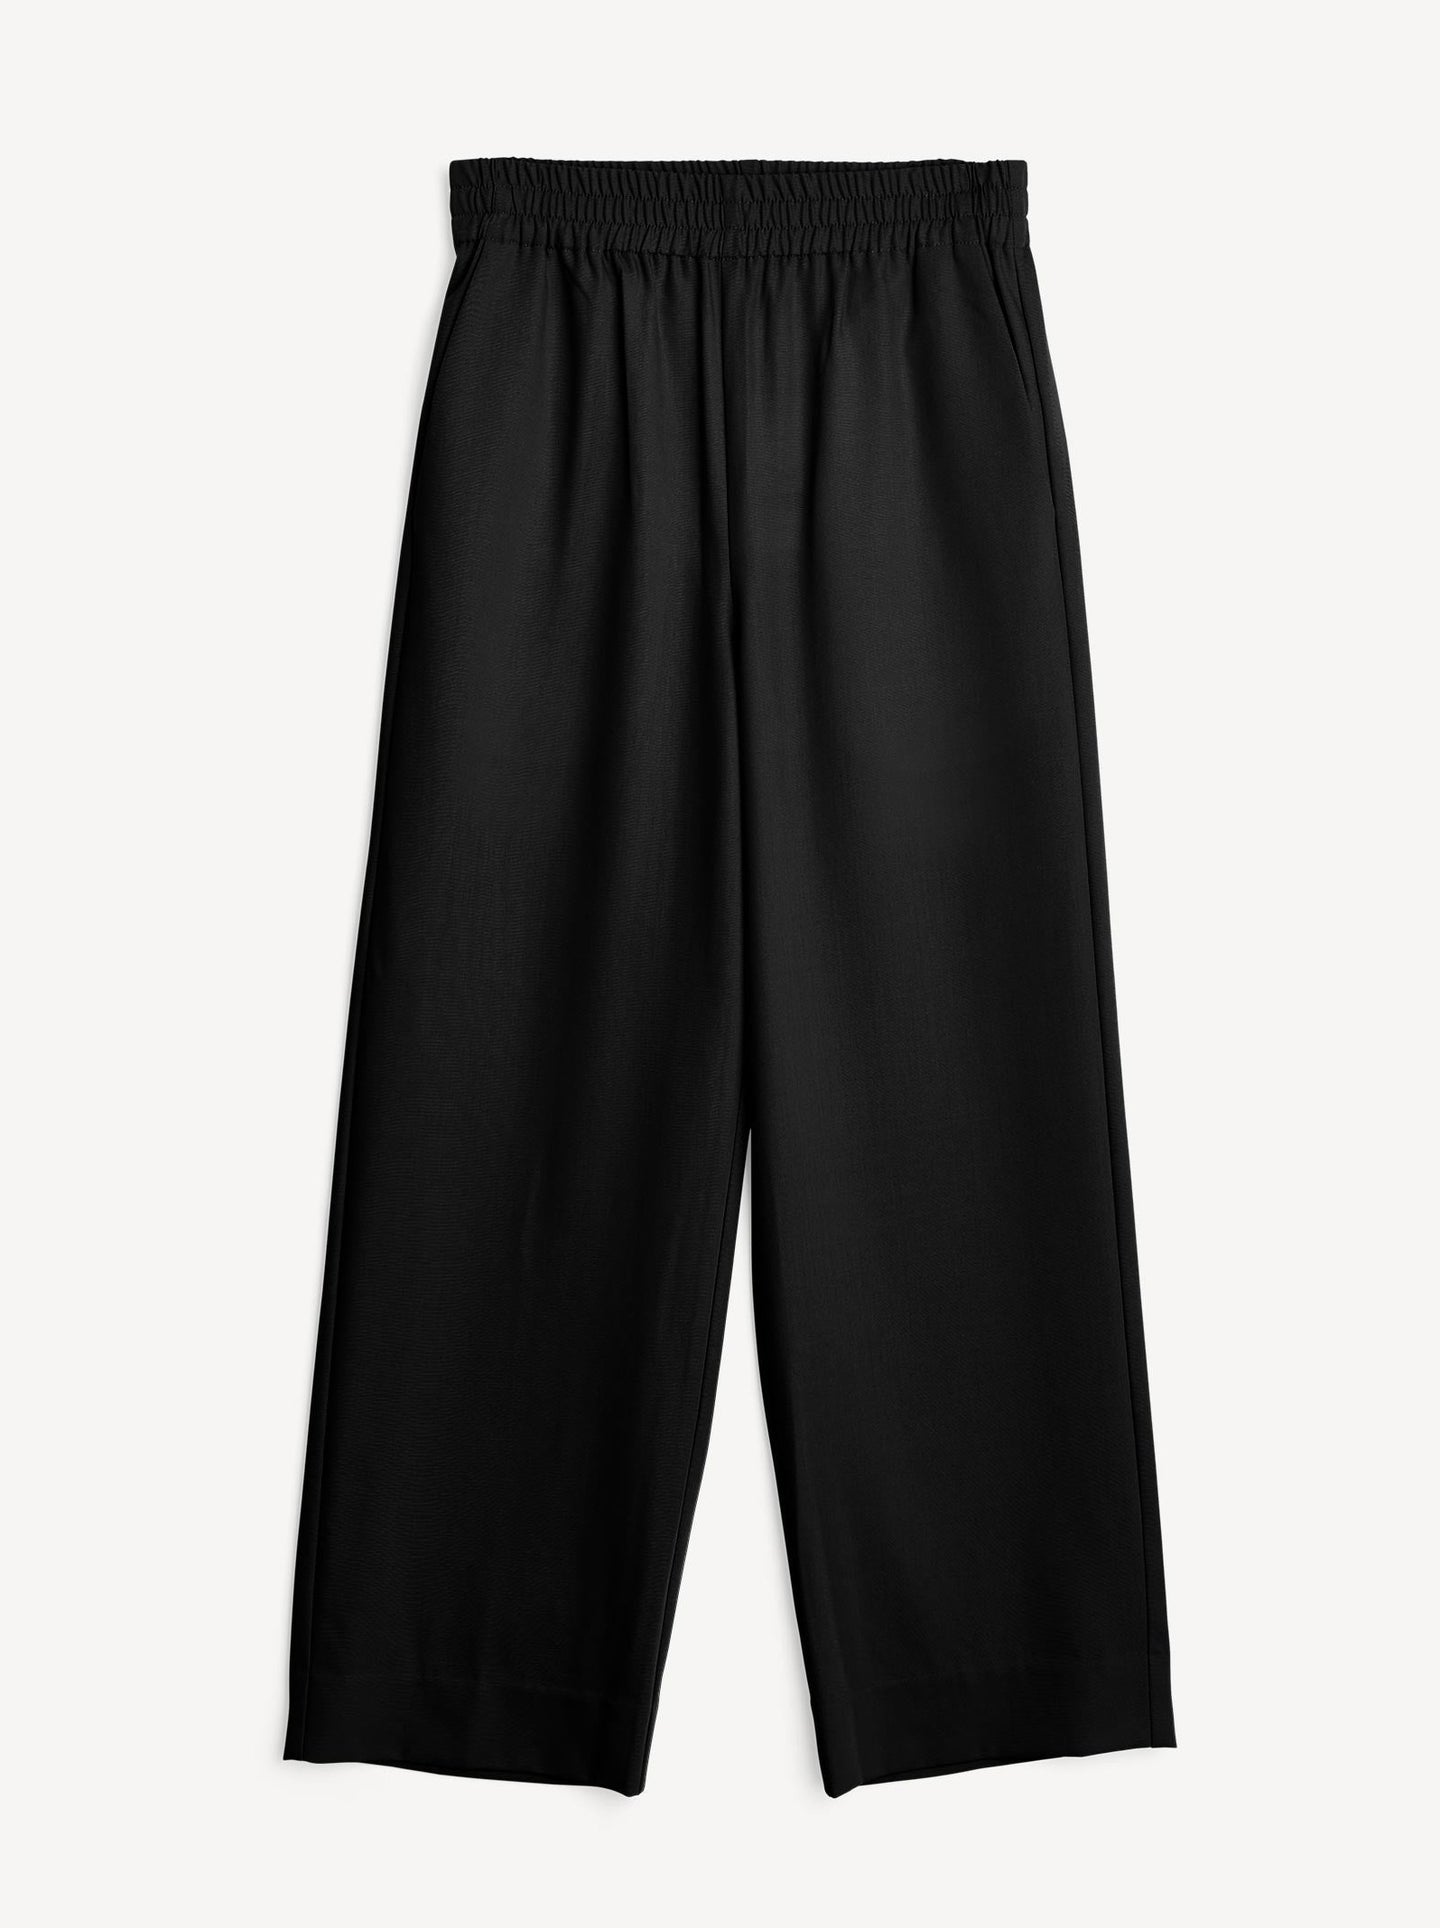 Lucassino trousers